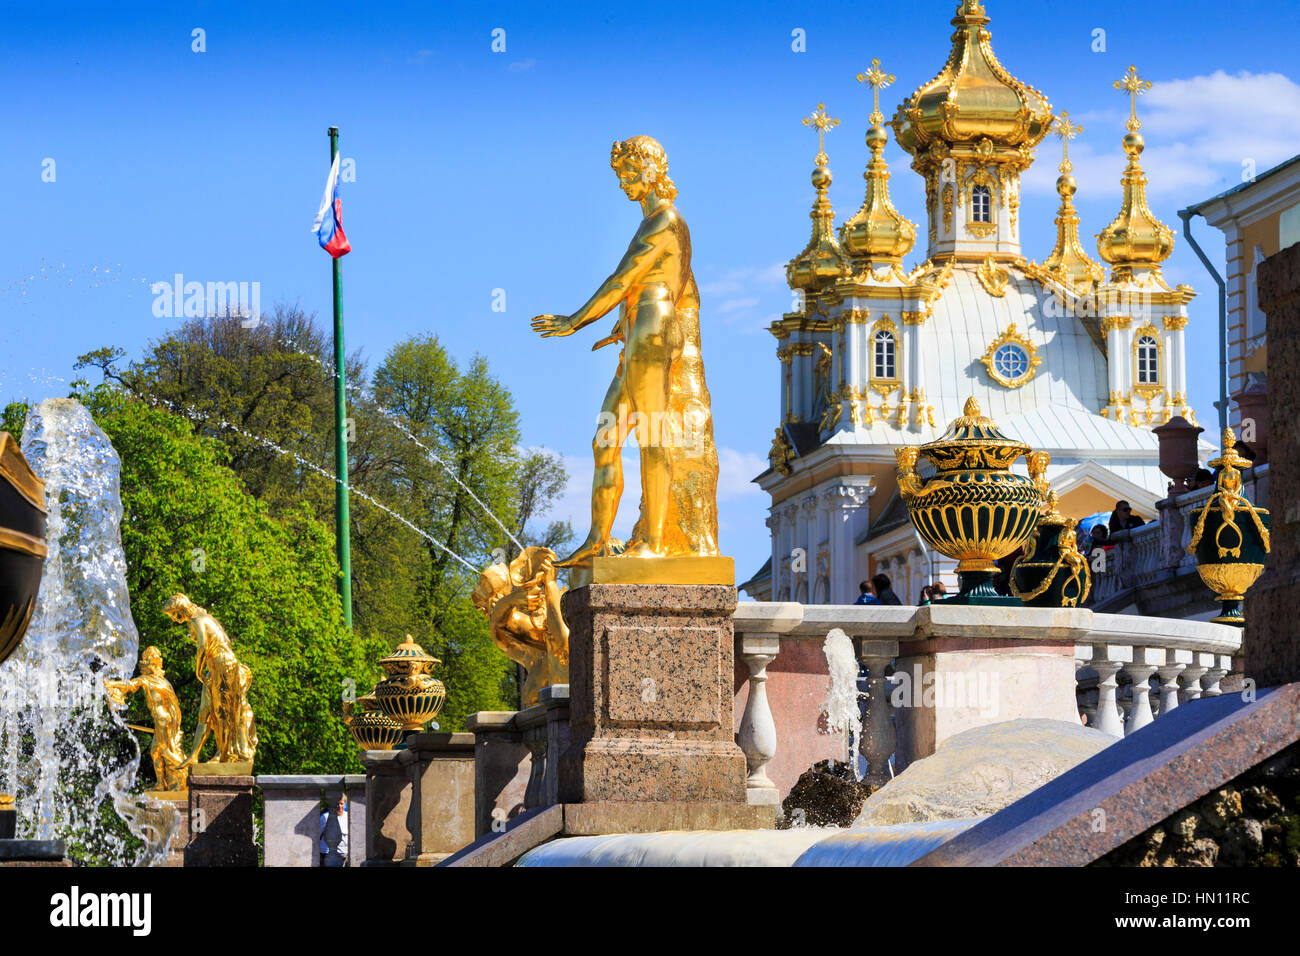 Gold statues and fountains of the grand cascade, Peterhof, St Petersburg, Russia Stock Photo